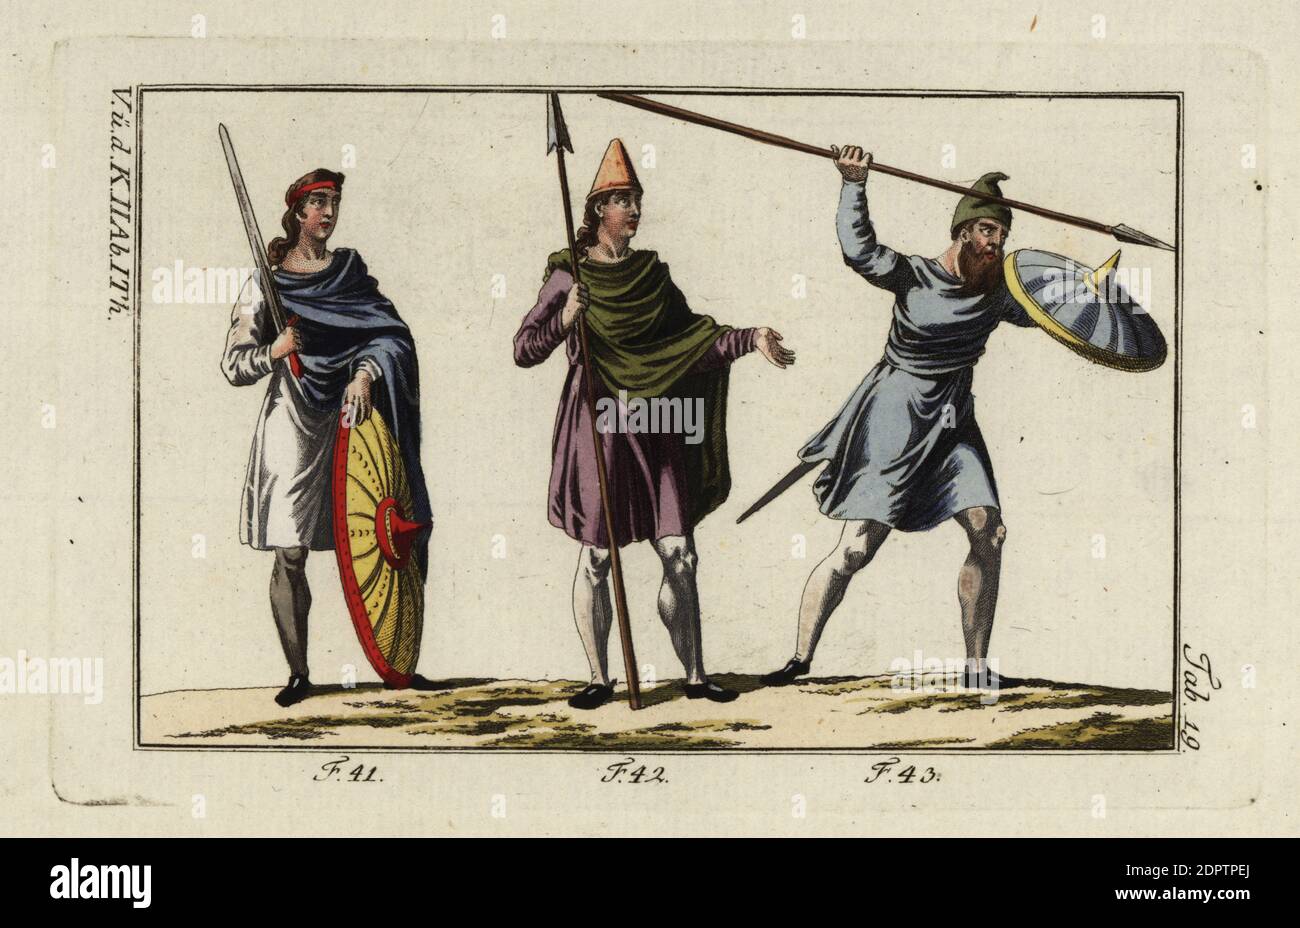 Anglo Saxon military. First officer in the royal guard with lance and shield 41, cavalier or mounted soldier with lance 42 and an infantry man or foot soldier in Phrygian cap with lance and shield raised aggressively 43. Handcolored copperplate engraving from Robert von Spalart's Historical Picture of the Costumes of the Principal People of Antiquity and Middle Ages, Vienna, 1796. Stock Photo